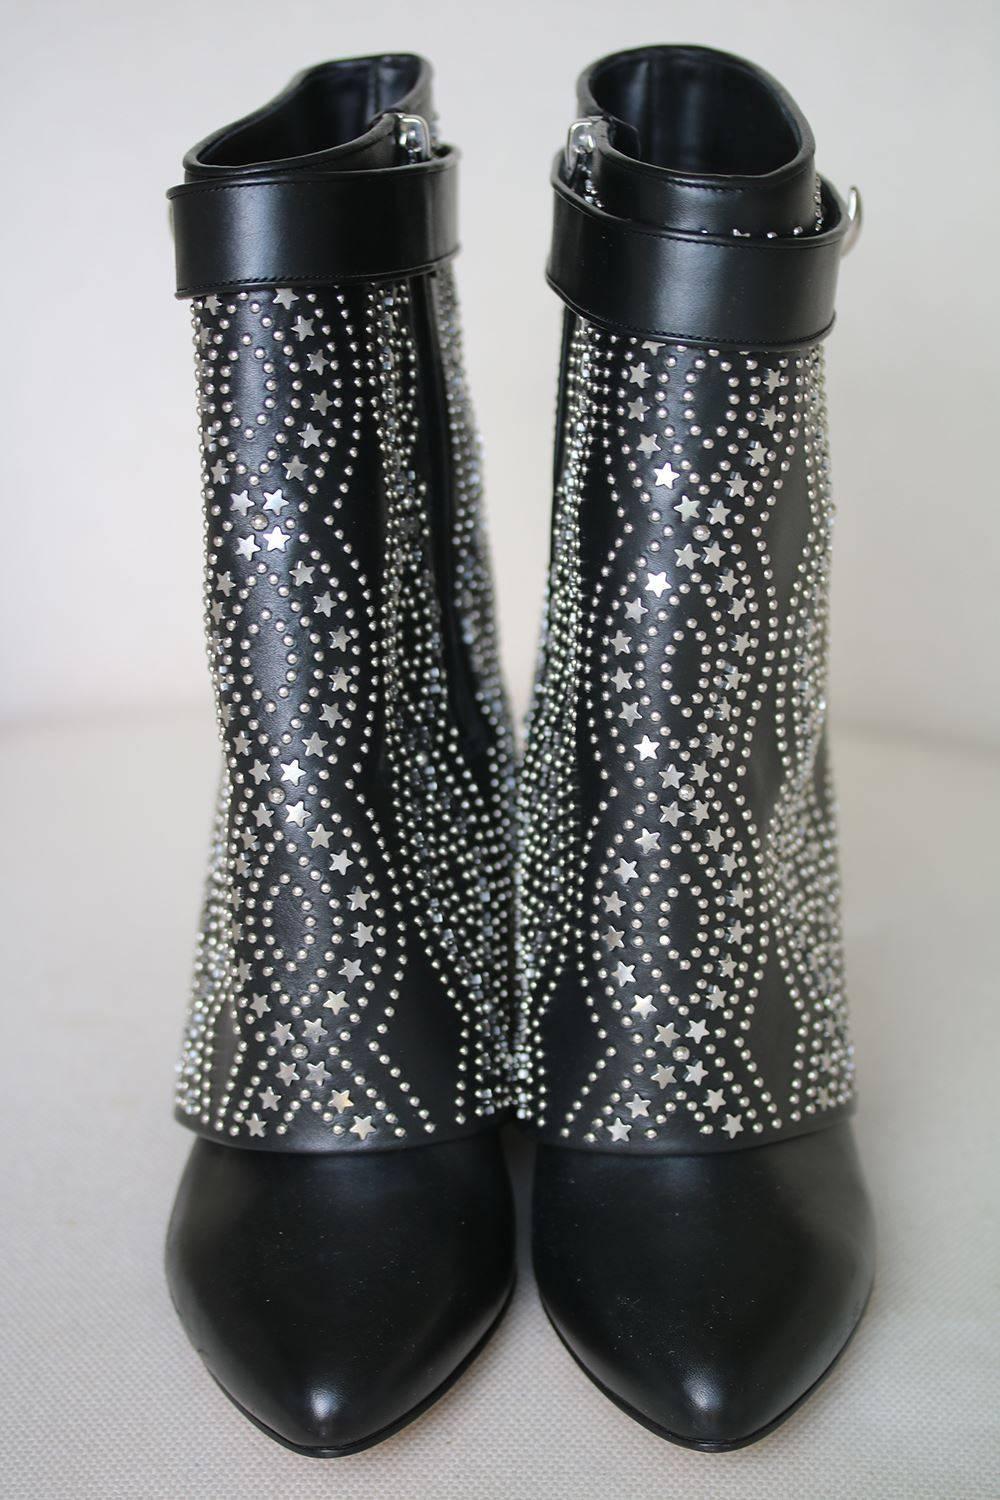 Givenchy studded leather mid-calf boot. 3.5